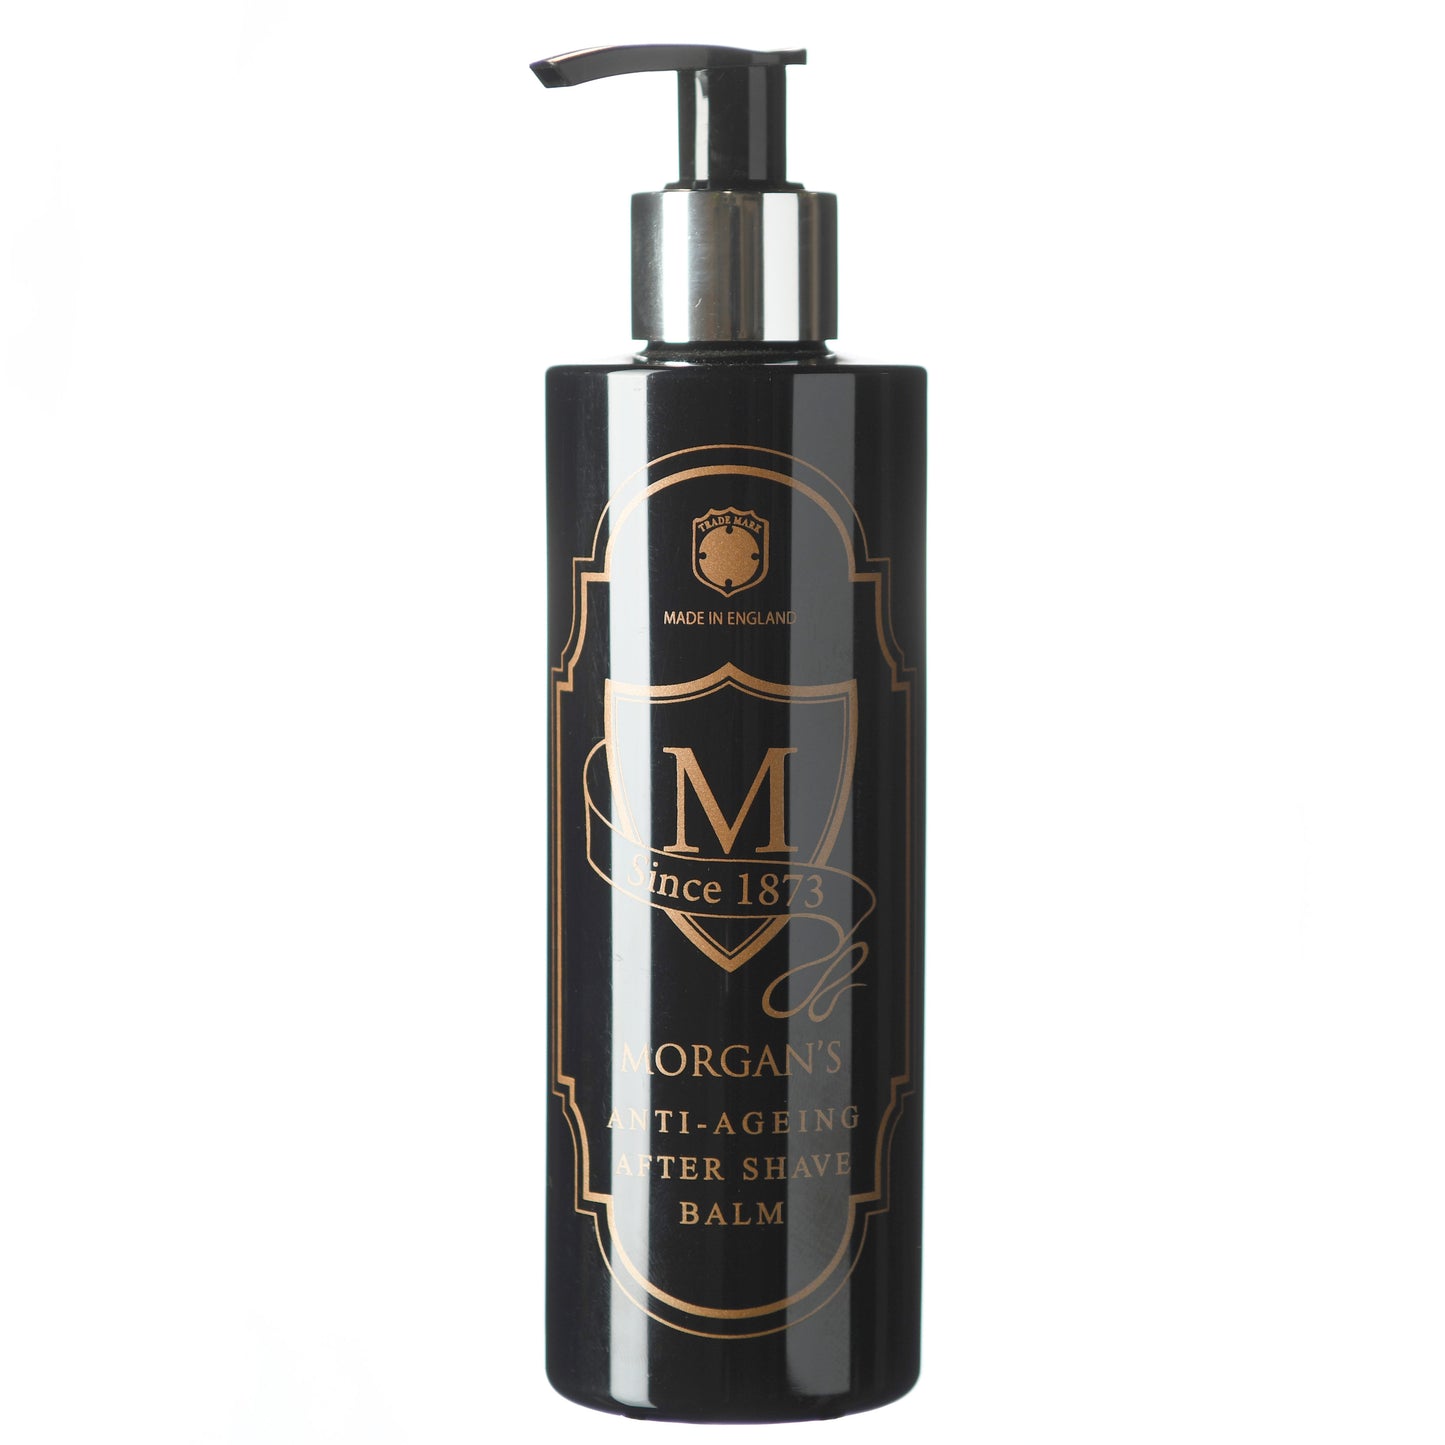 Morgan's Anti-Ageing After Shave Balm